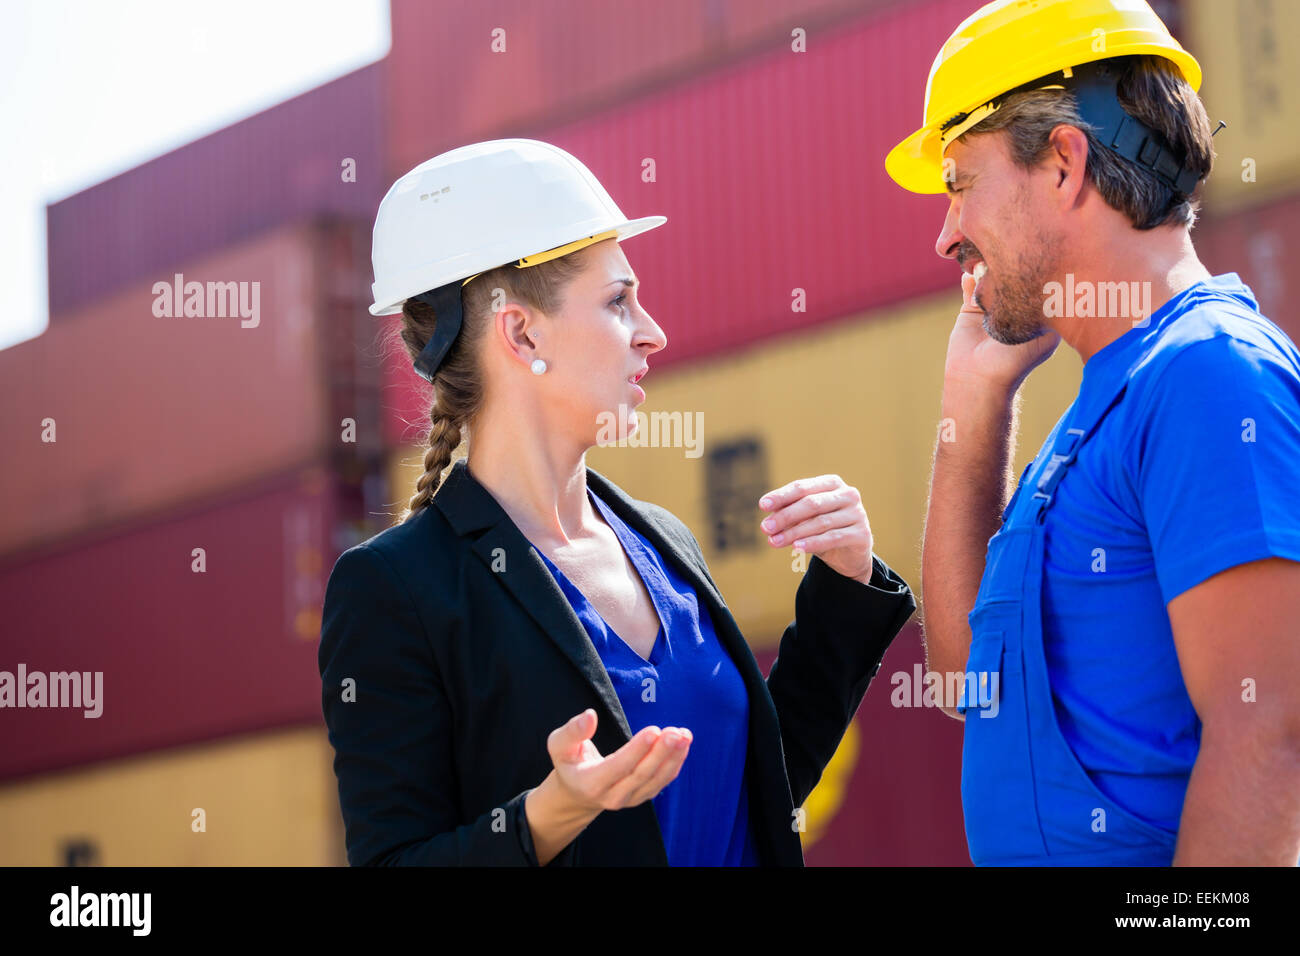 Freight shipping at container terminal of port, worker and manager discussing shipments Stock Photo